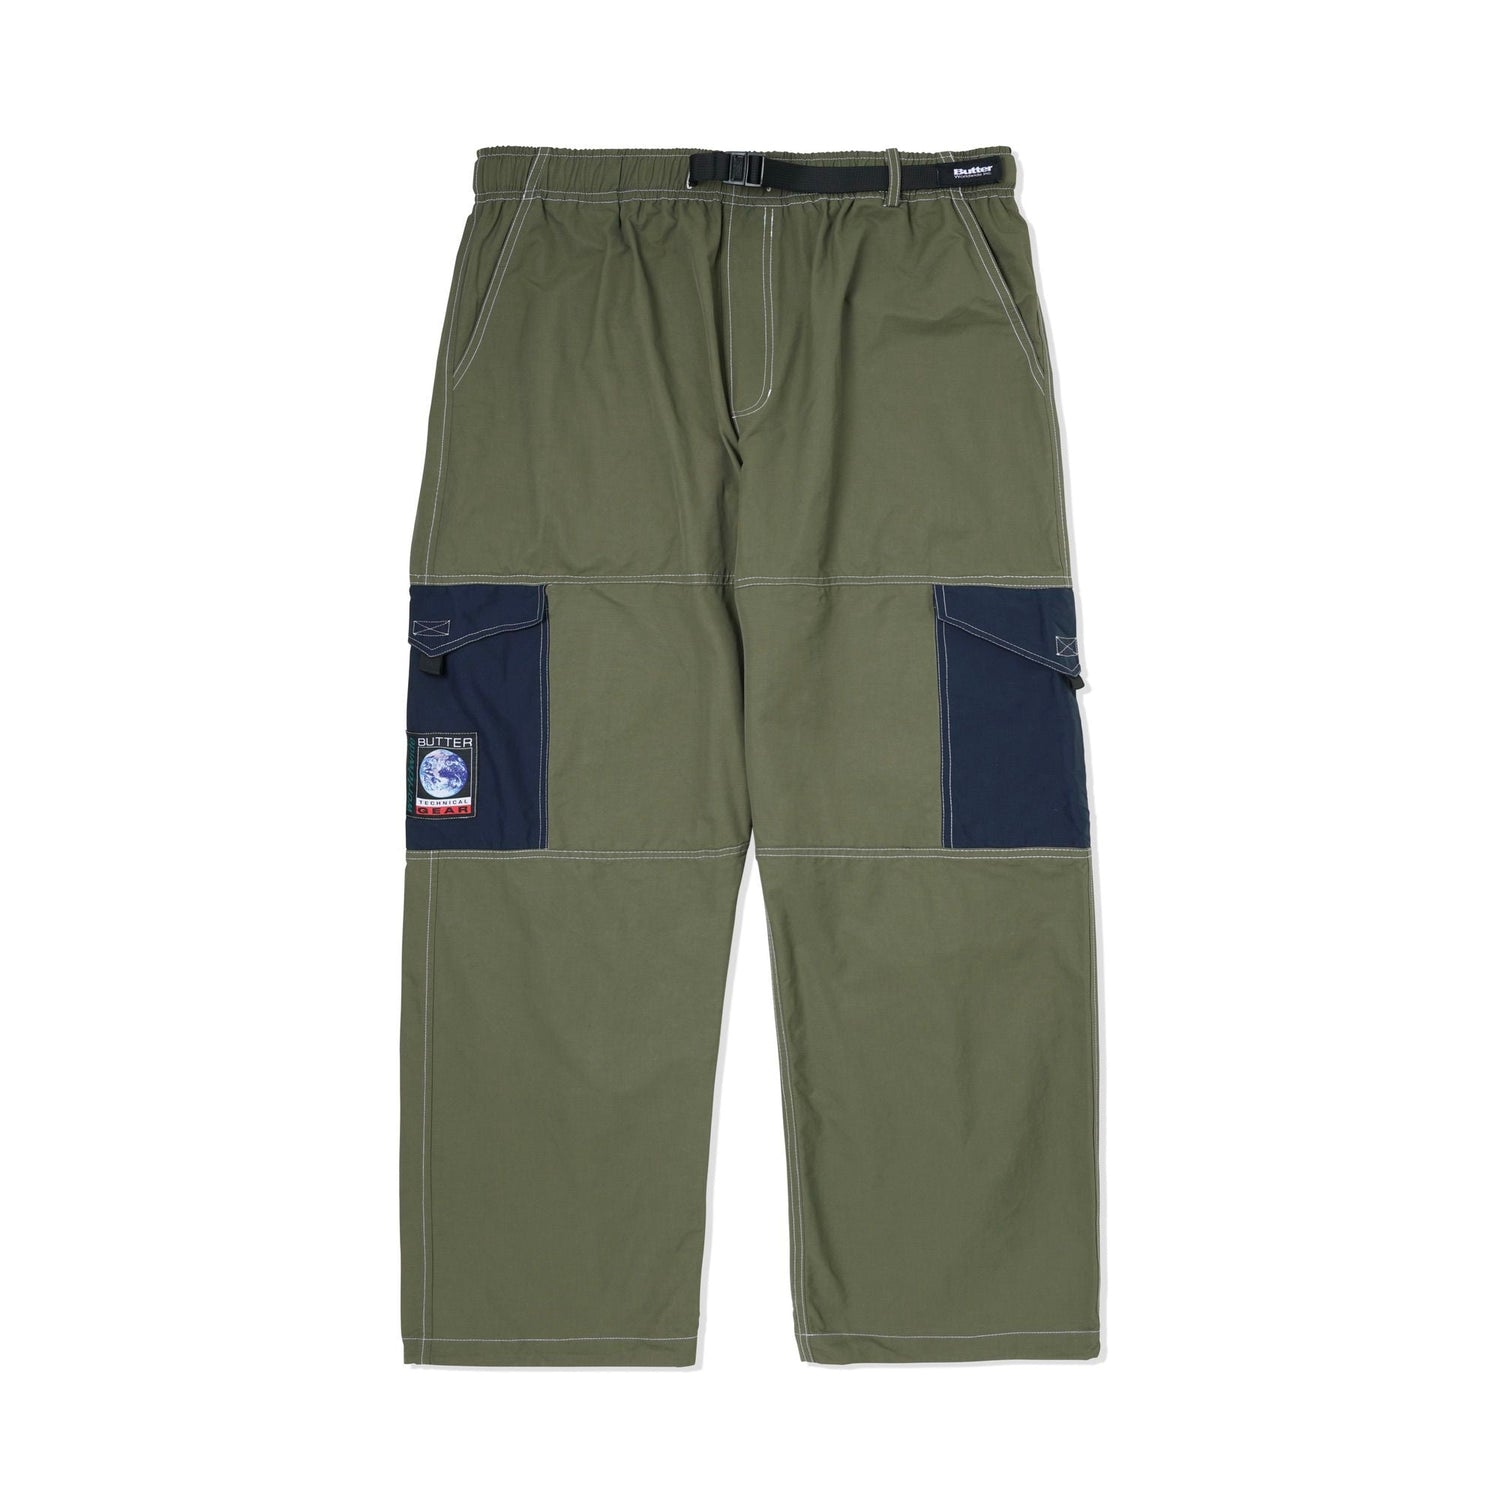 Contrast Cargo Pants. Army